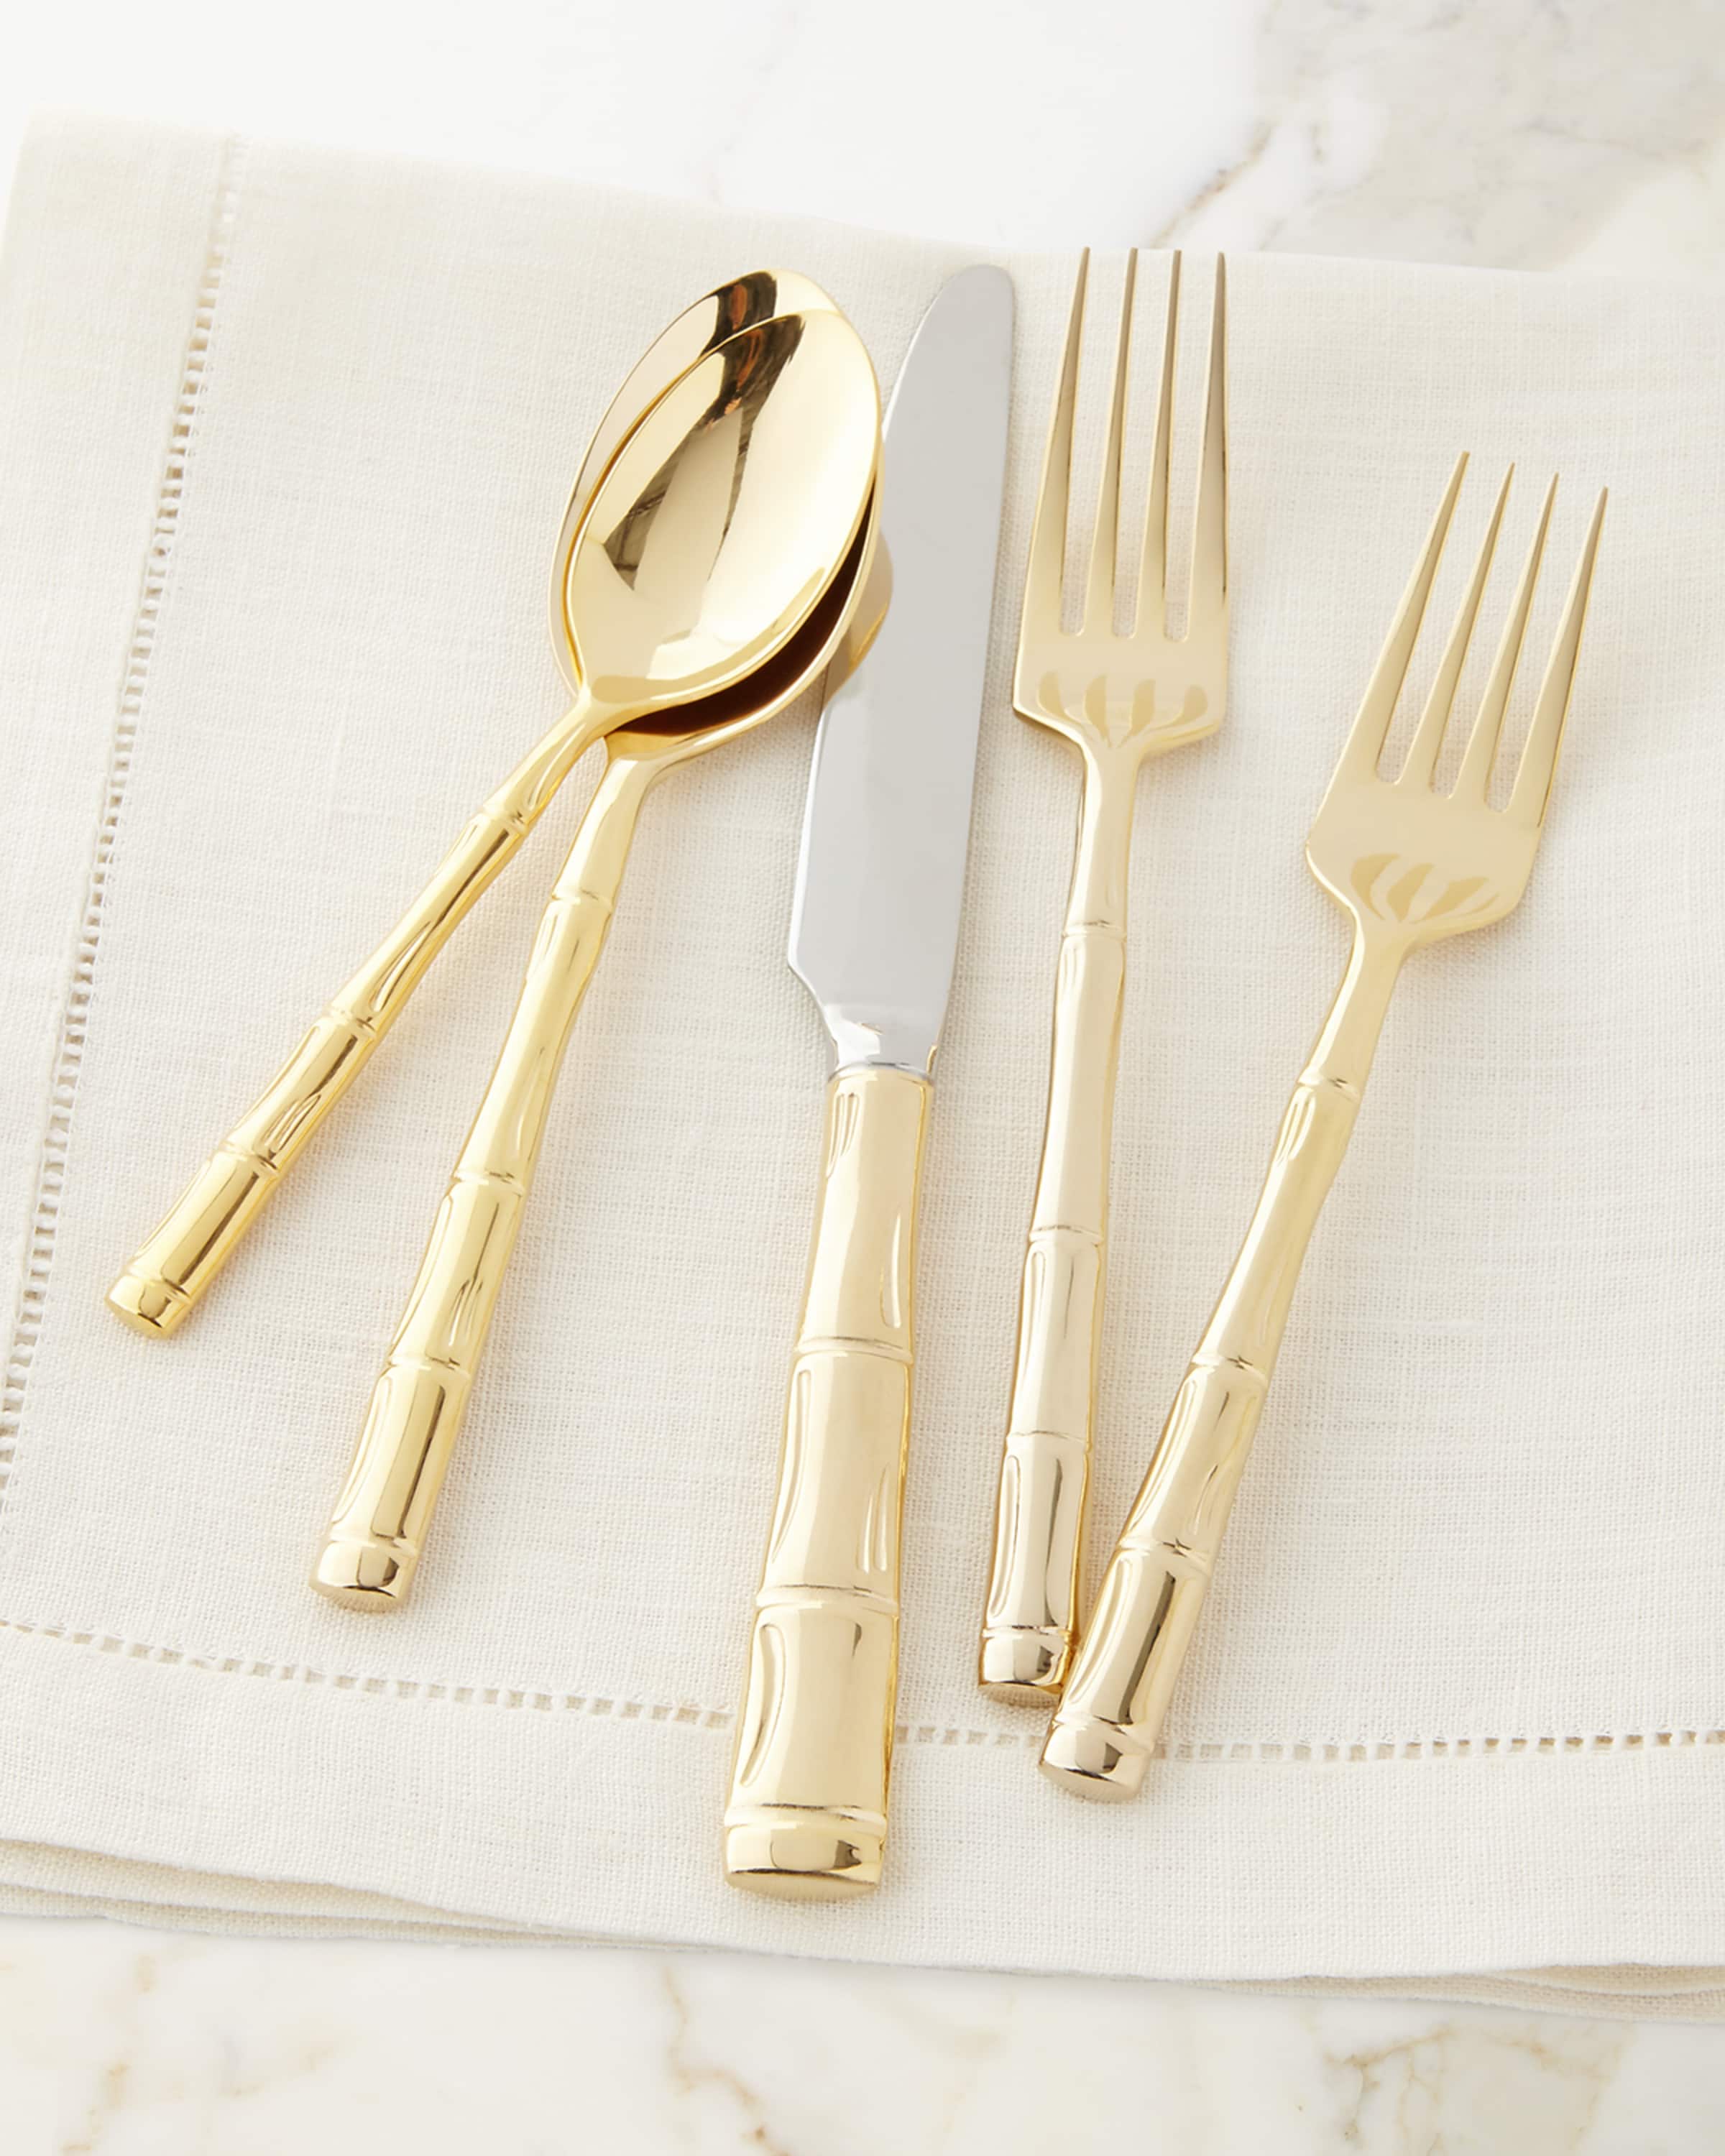 Wallace Silversmiths20-Piece Gold Bamboo Flatware Service | Horchow